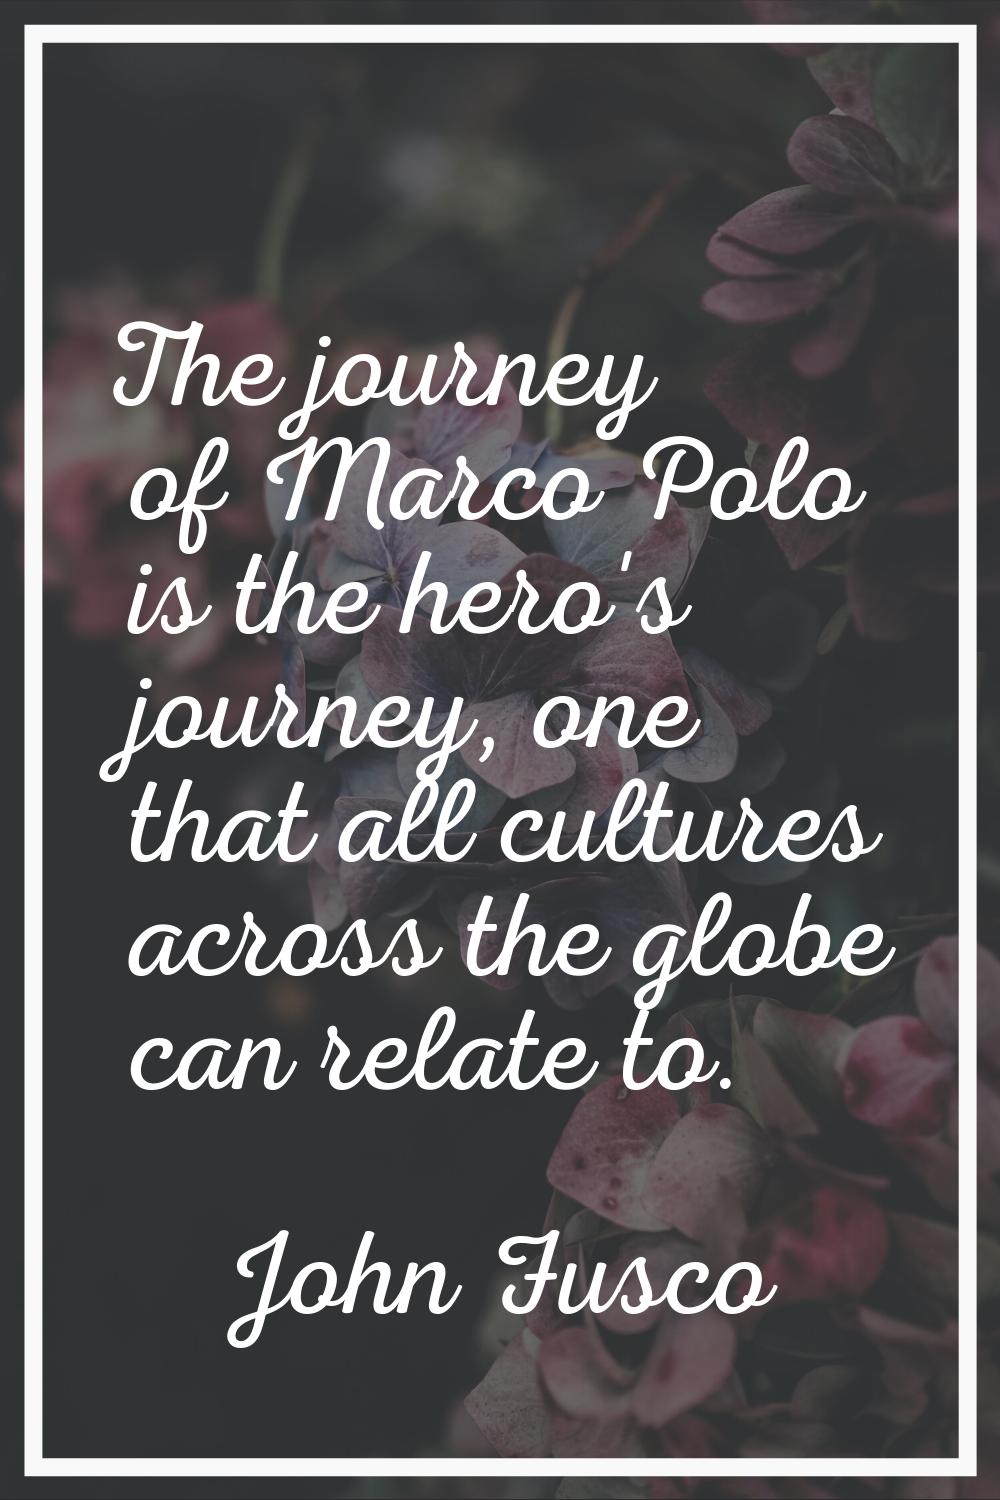 The journey of Marco Polo is the hero's journey, one that all cultures across the globe can relate 